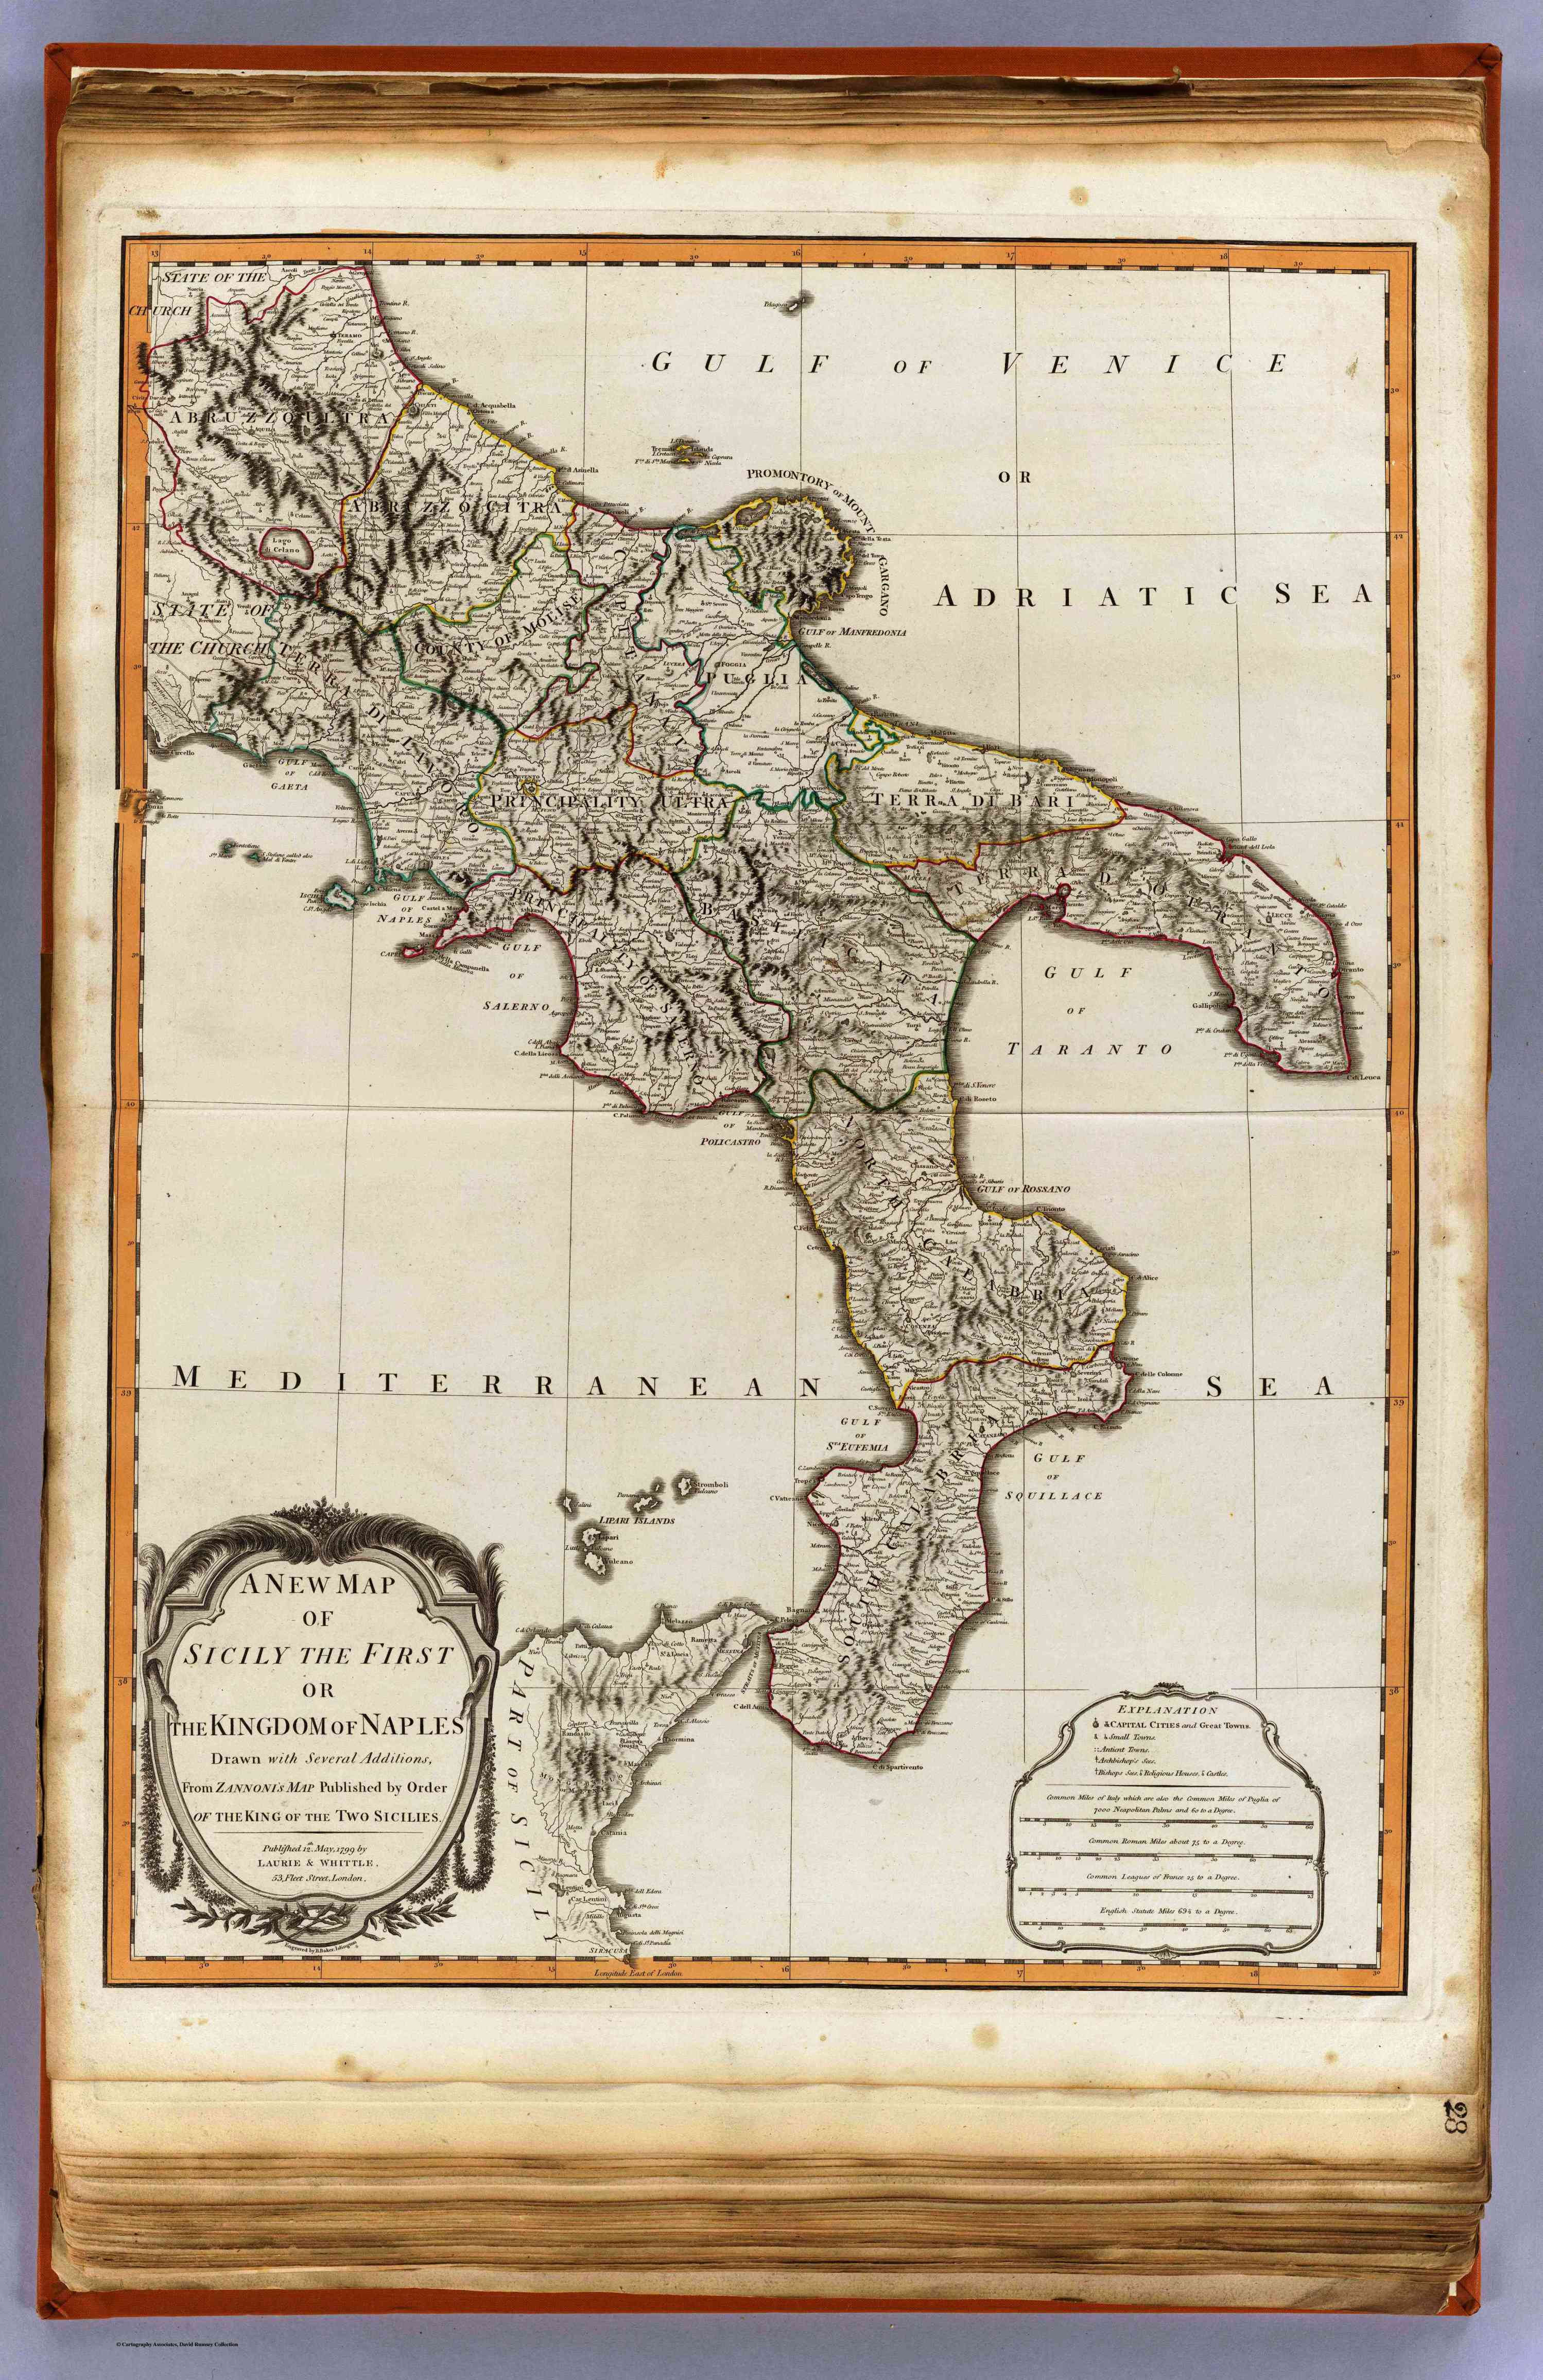 Il Regno delle Due Sicilie  A new map of Sicily the First or the Kingdom of Naples  Drawn with several additions, from Zannoni's map published by order of the King of the Two Sicilies  Published 12th May, 1799 by Laurie & Whittle, 53, Fleet Street, London  Engraved by B  Baker, Islington 